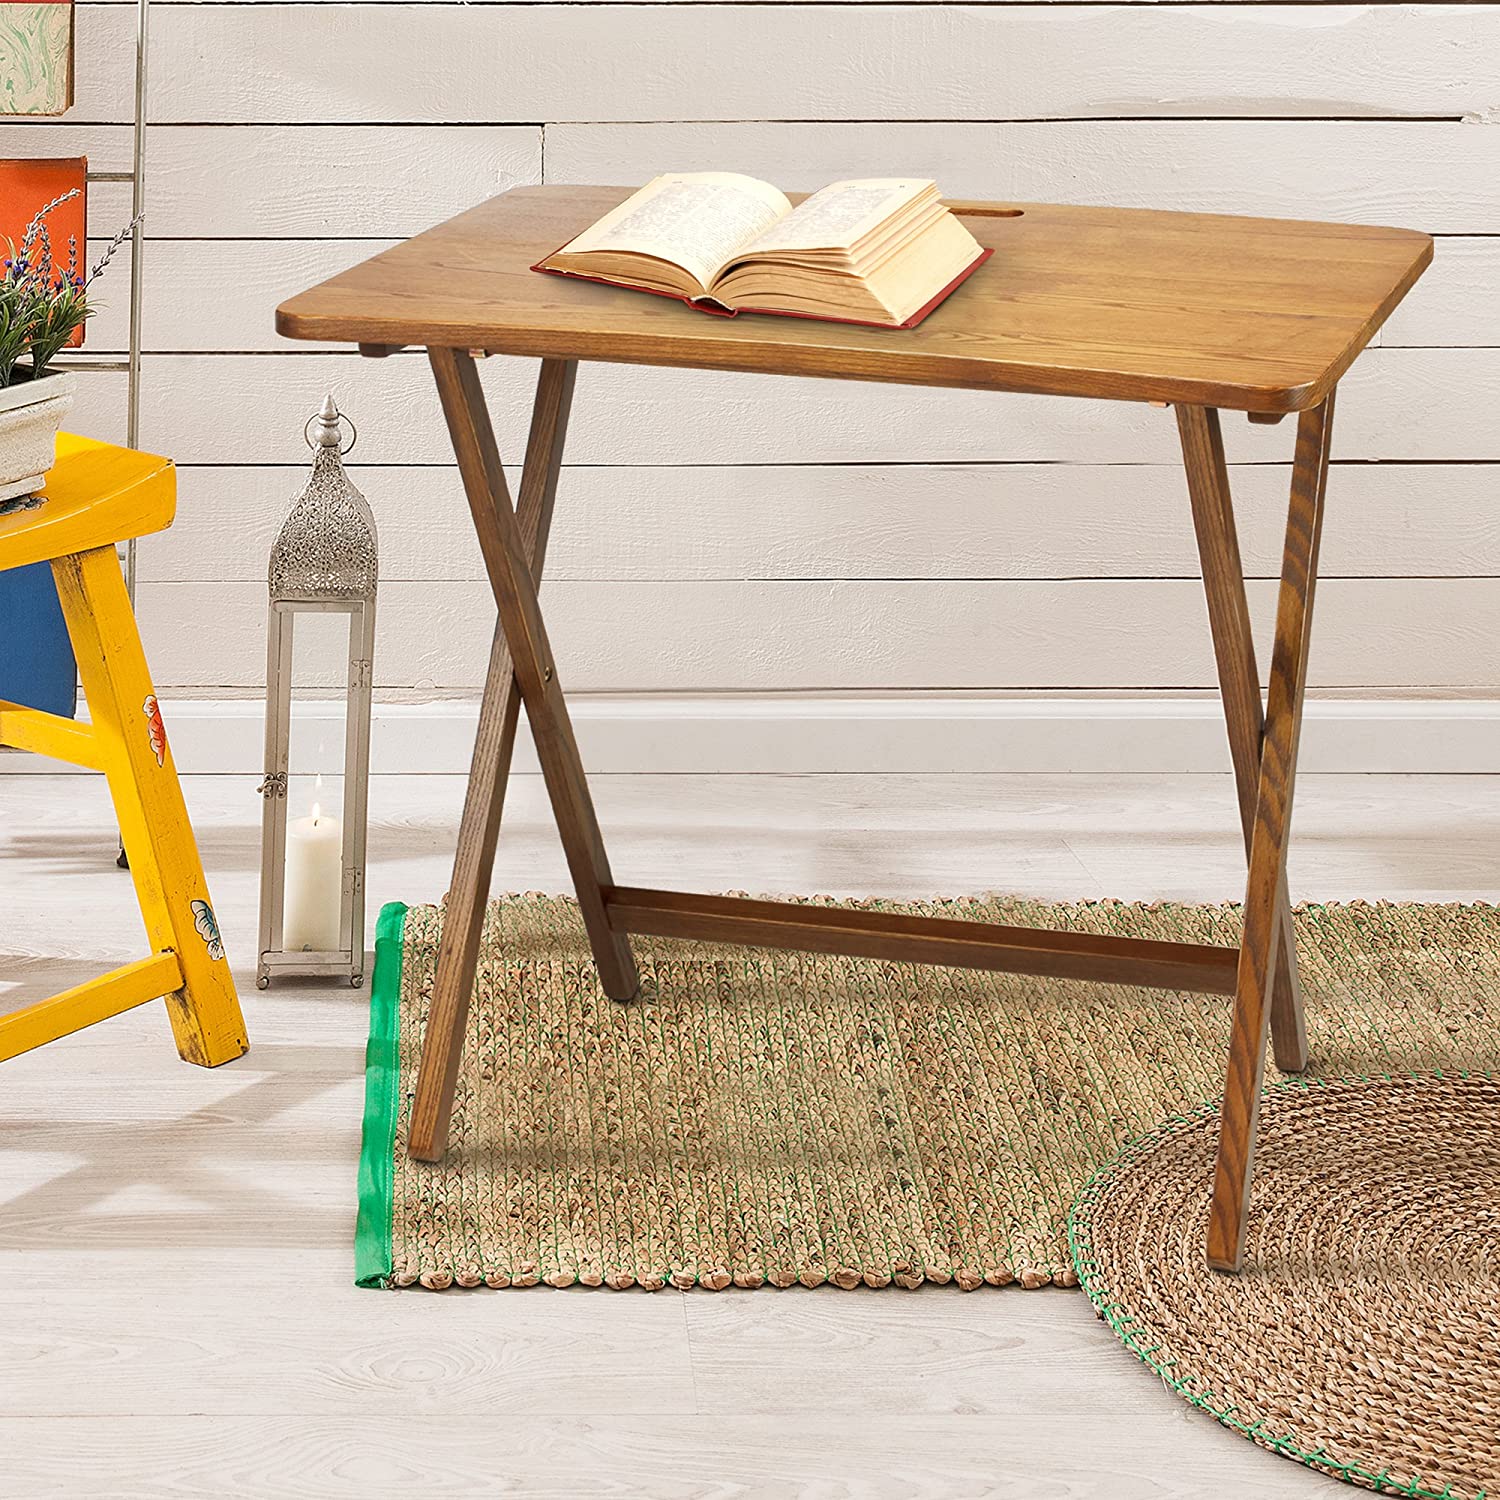 PRESTO PRODUCTS COMPANY American Trails Arizona Folding Table with Solid Red Oak